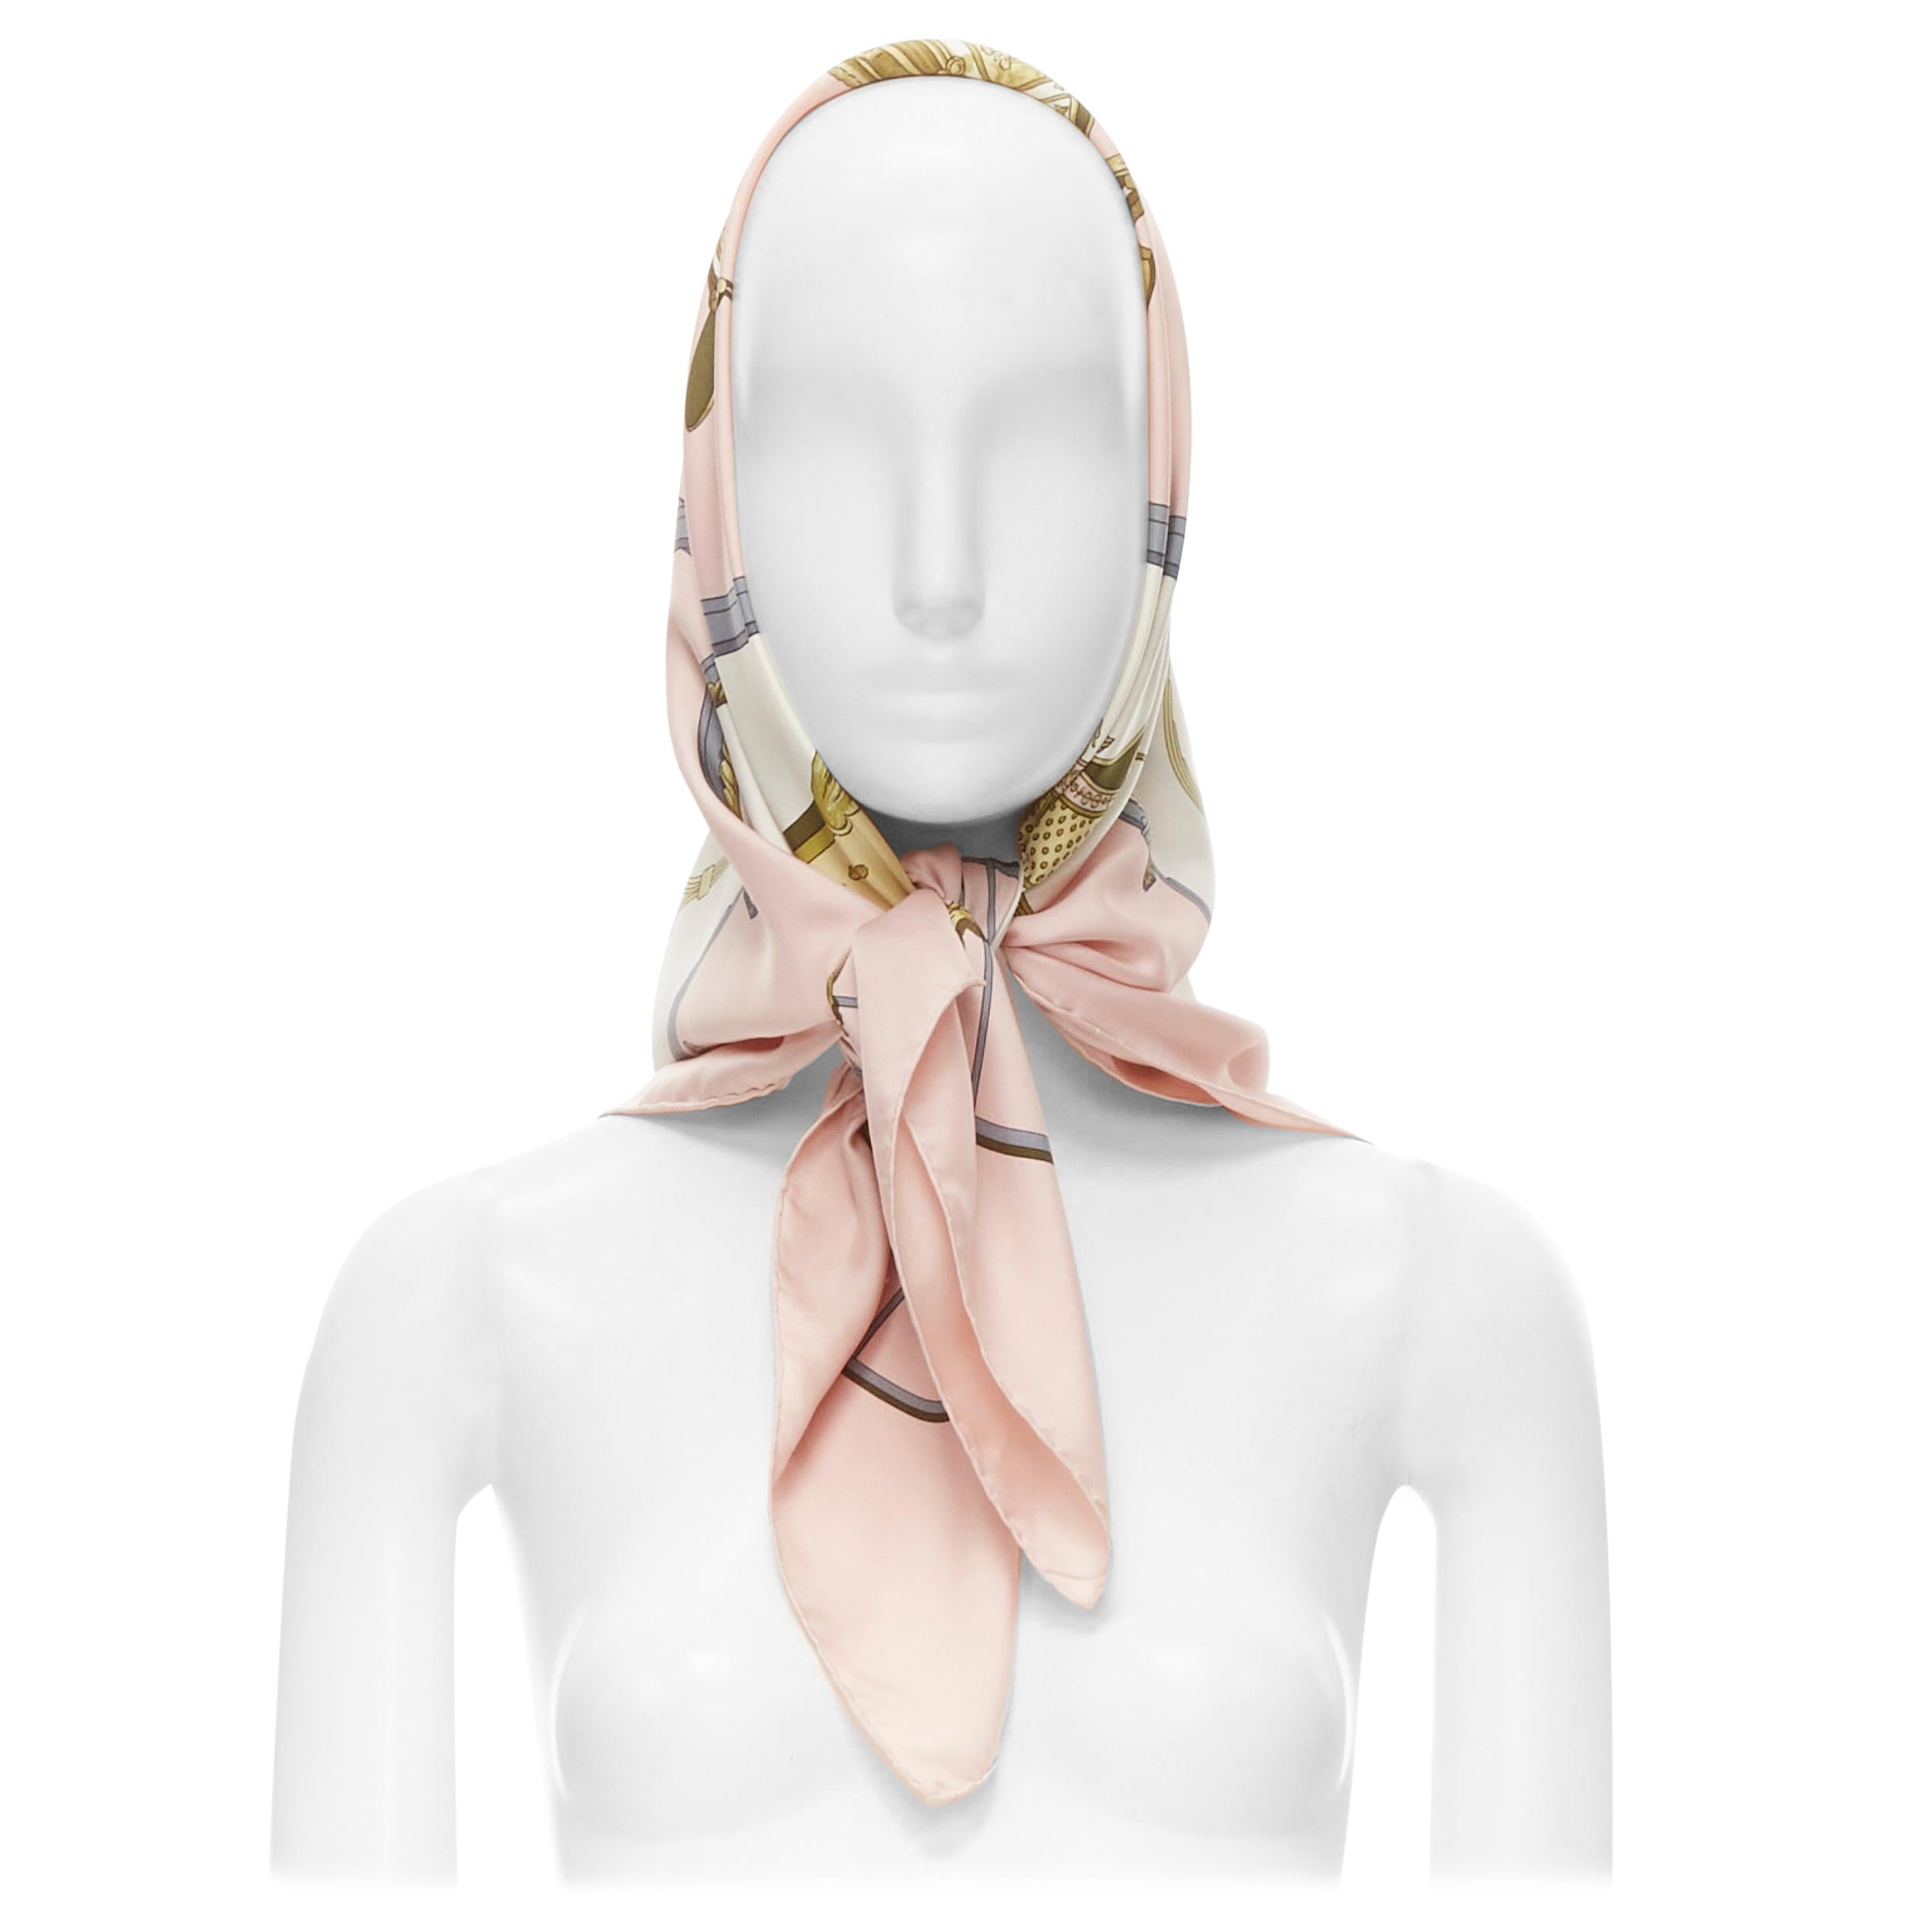 HERMES Phillippe Ledoux 1998 'Springs' pink gold print twill silk scarf